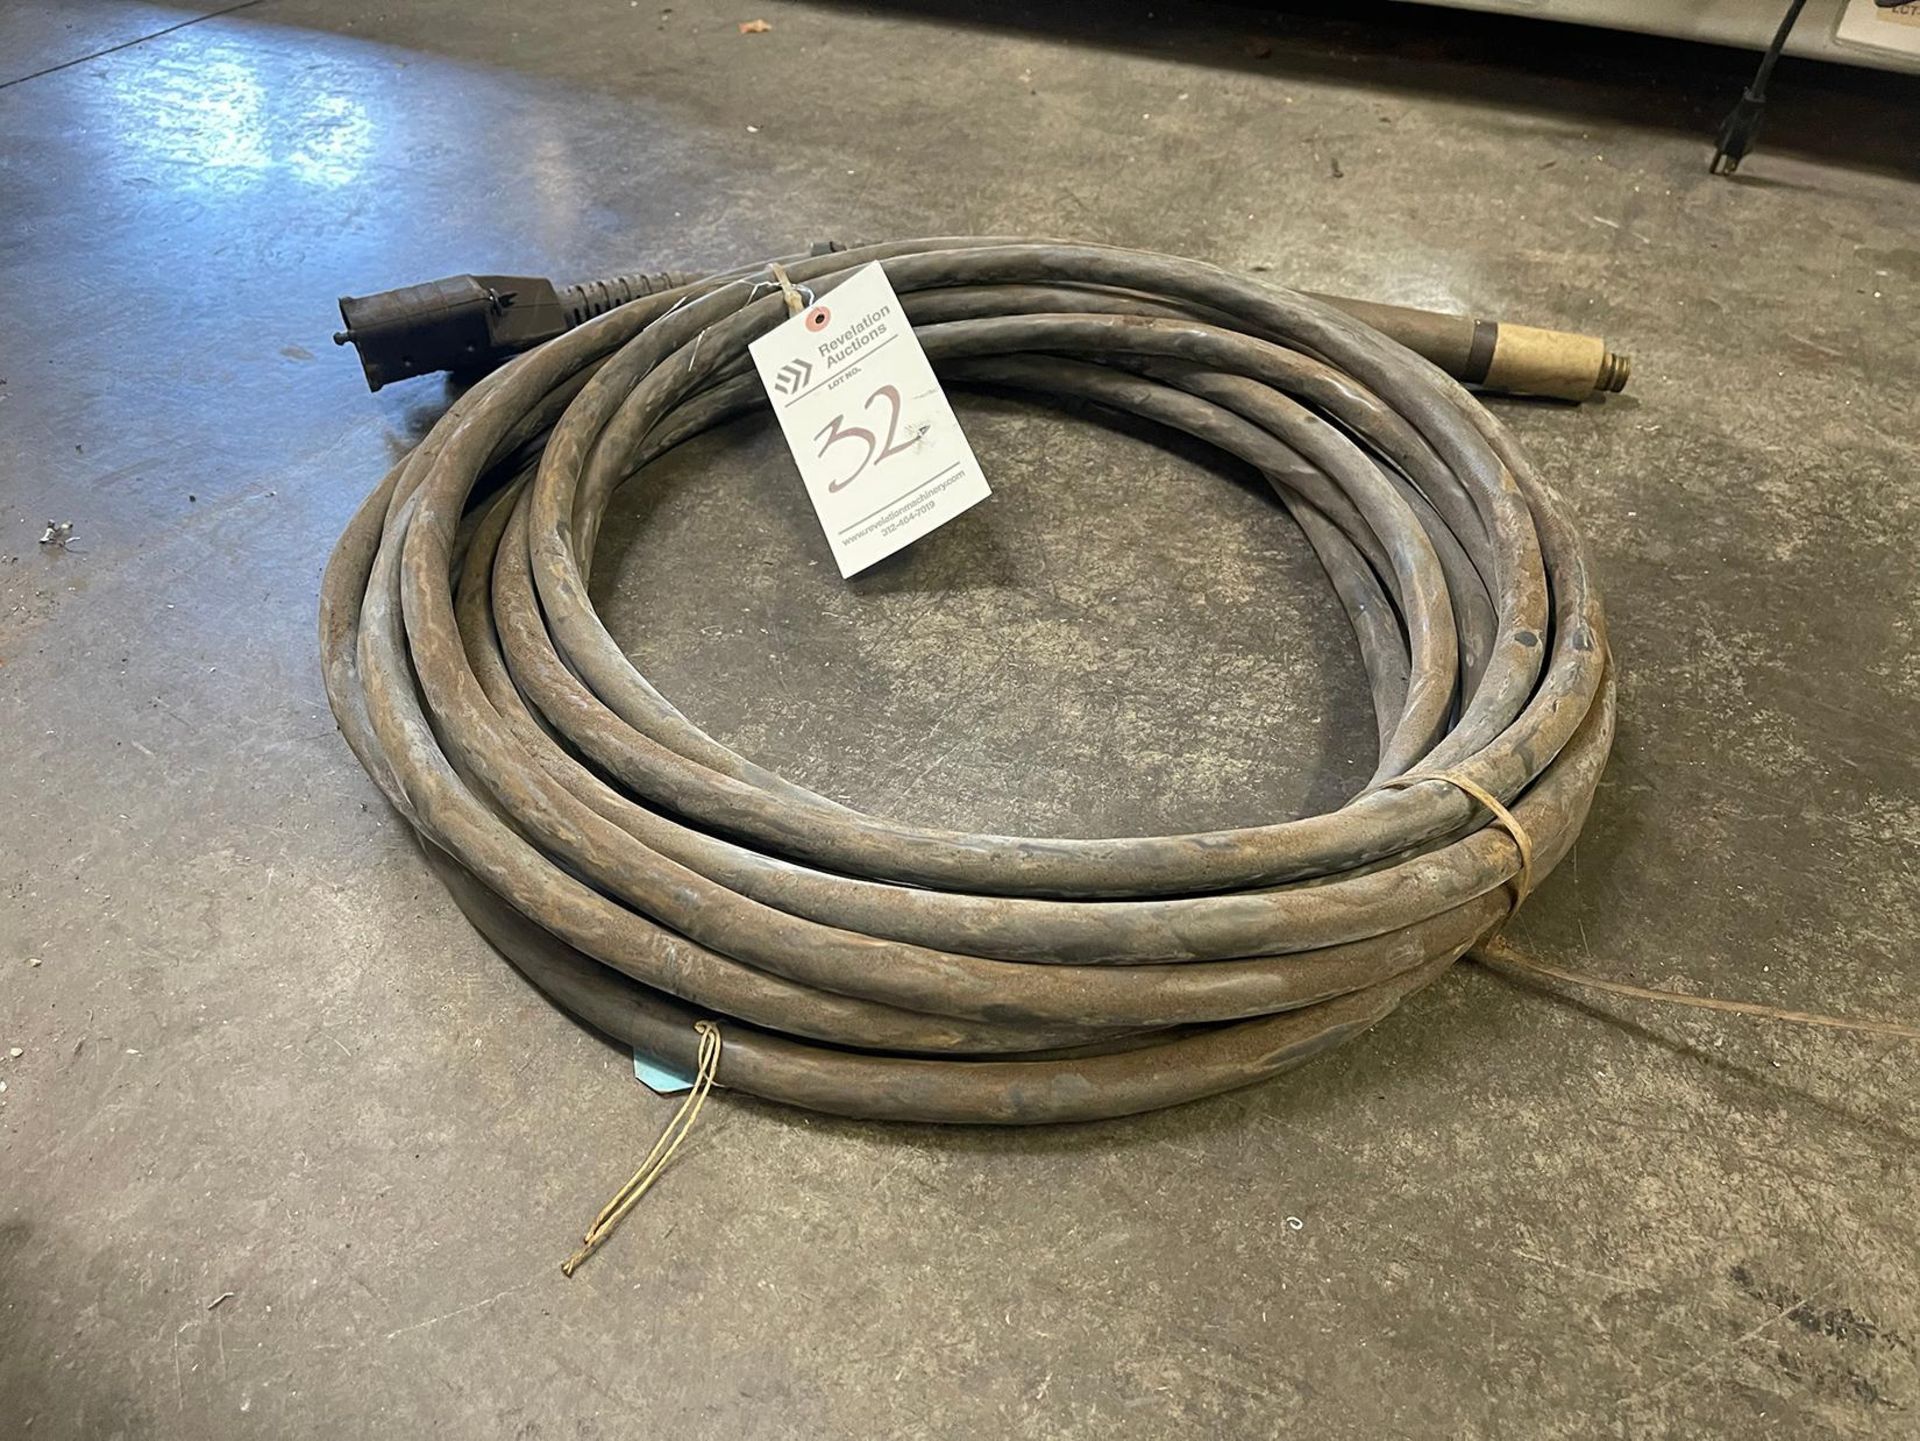 MILLER PLASMA CUTTER CABLE